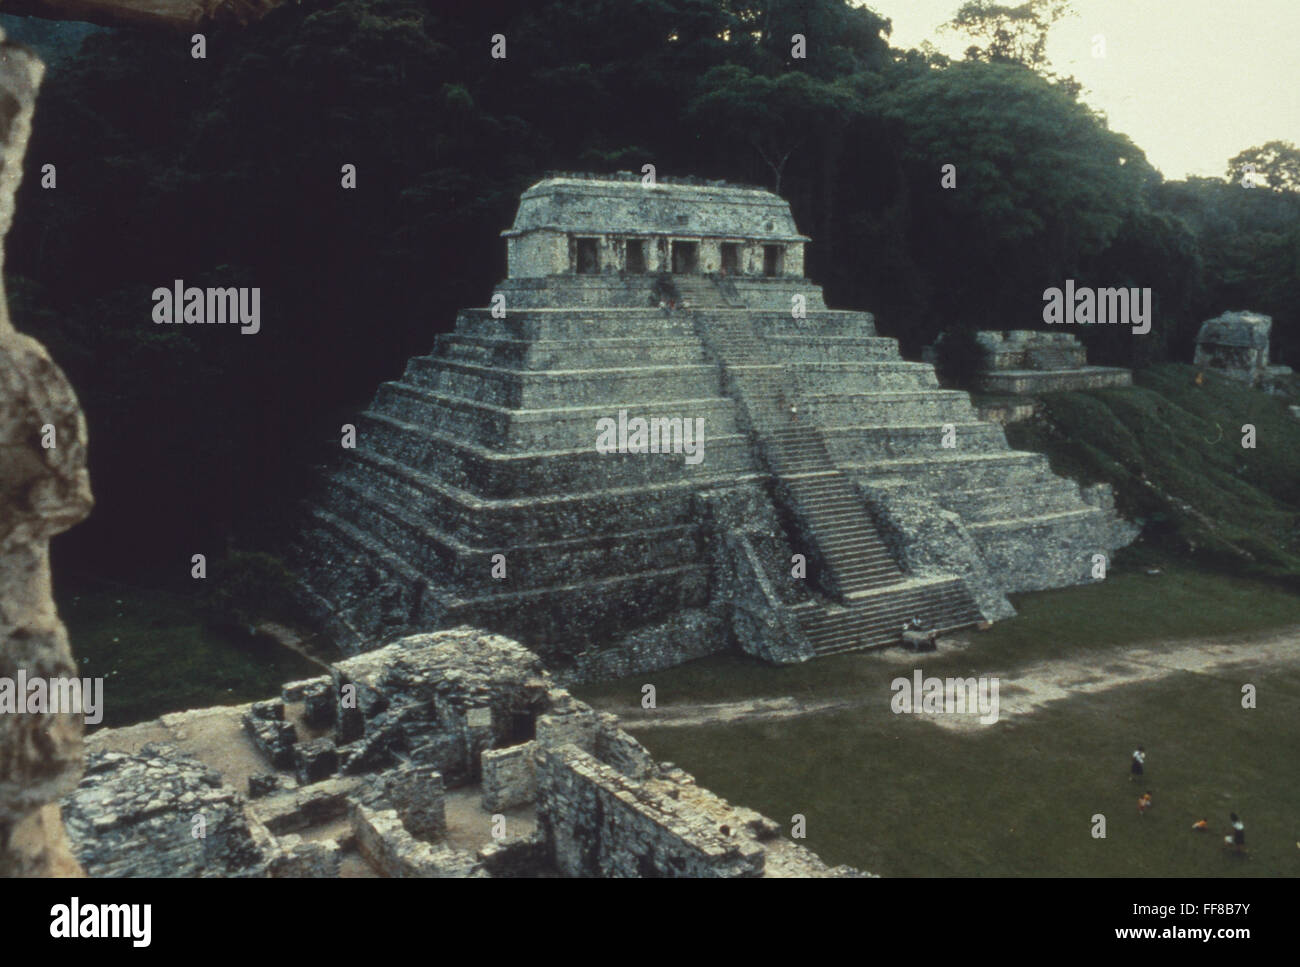 PALENQUE: MAYAN TEMPLE. /nMayan temple of Inscriptions at Palenque, Mexico. Stock Photo